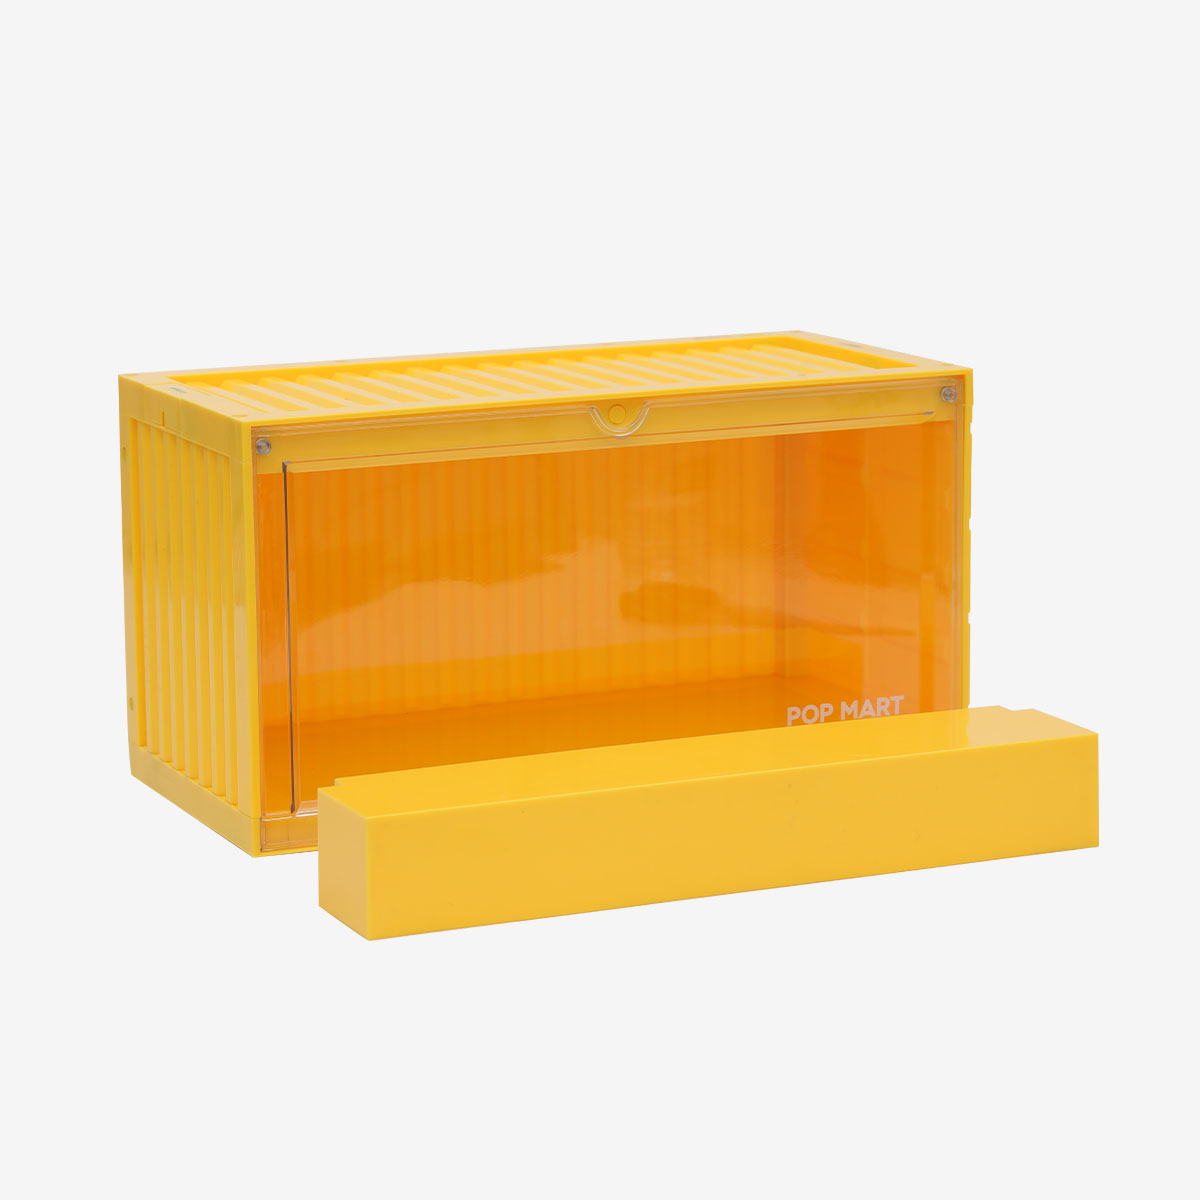 【Limited】POP MART LED Luminous Display Container -PURE YELLOW